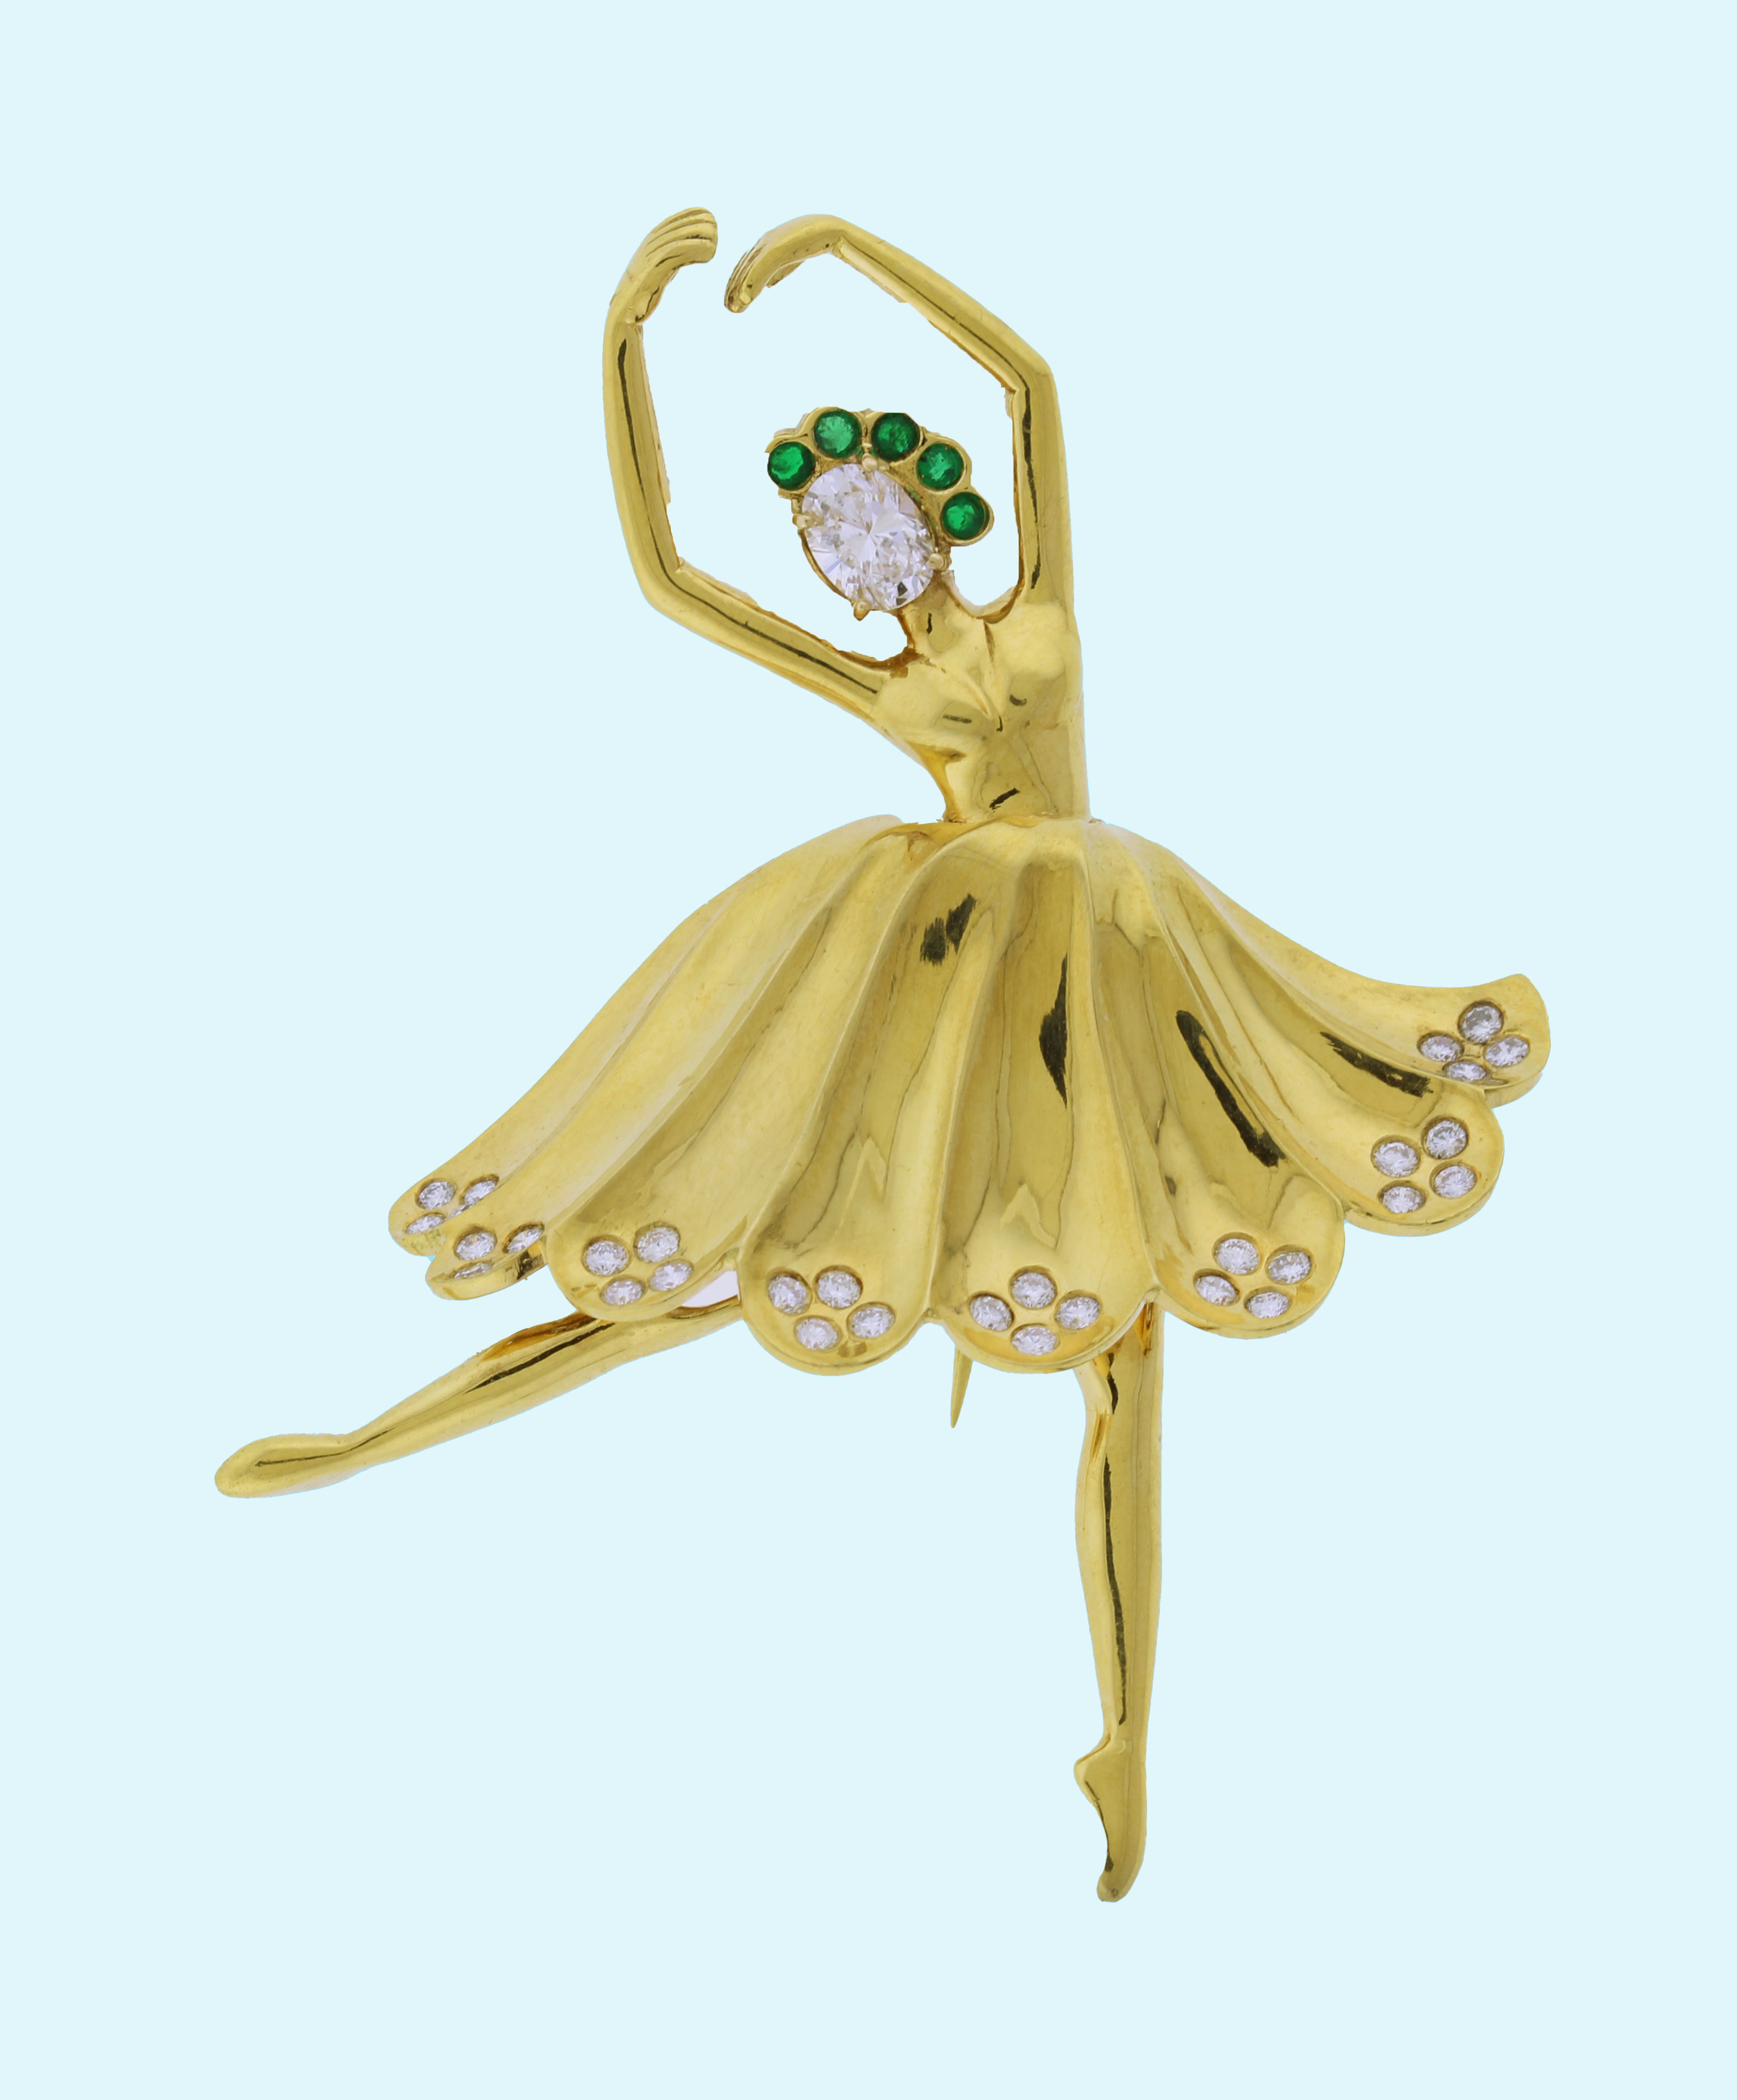 Emerald and Diamond Ballerina Brooch By Pampillonia Jewelers